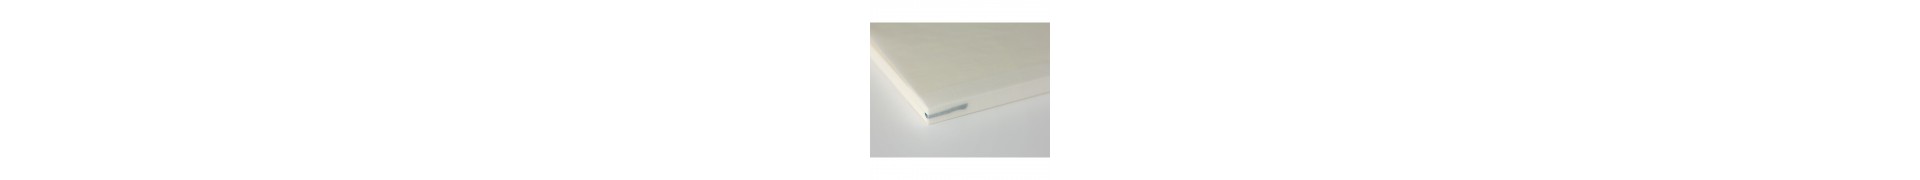 CARNET NOTEBOOK MD - A6 - RULED LINES ENGLISH - PAPIER LIGNE 